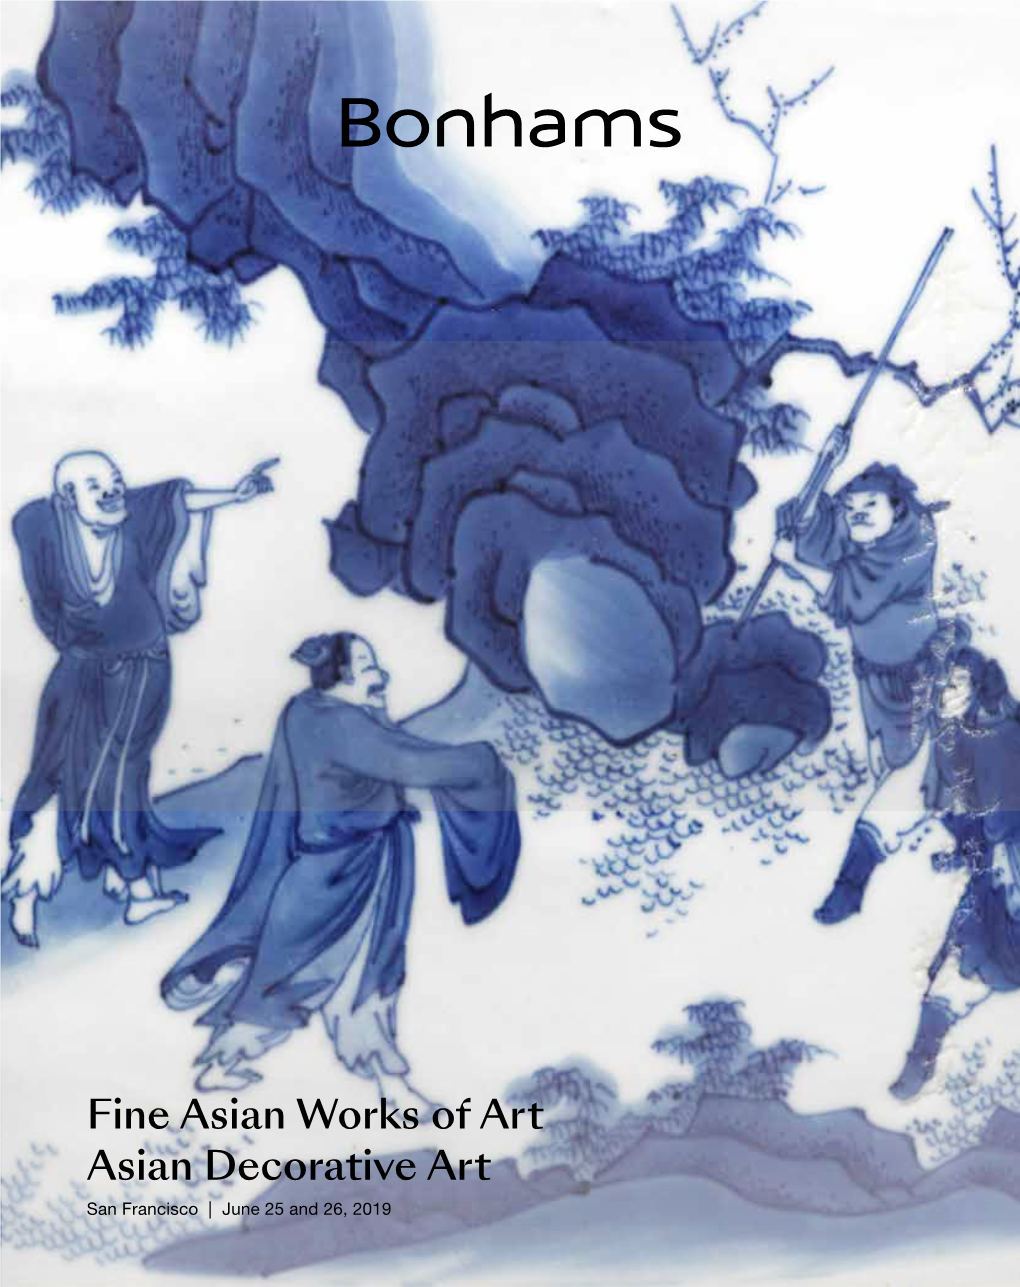 Fine Asian Works of Art Asian Decorative Art San Francisco | June 25 and 26, 2019